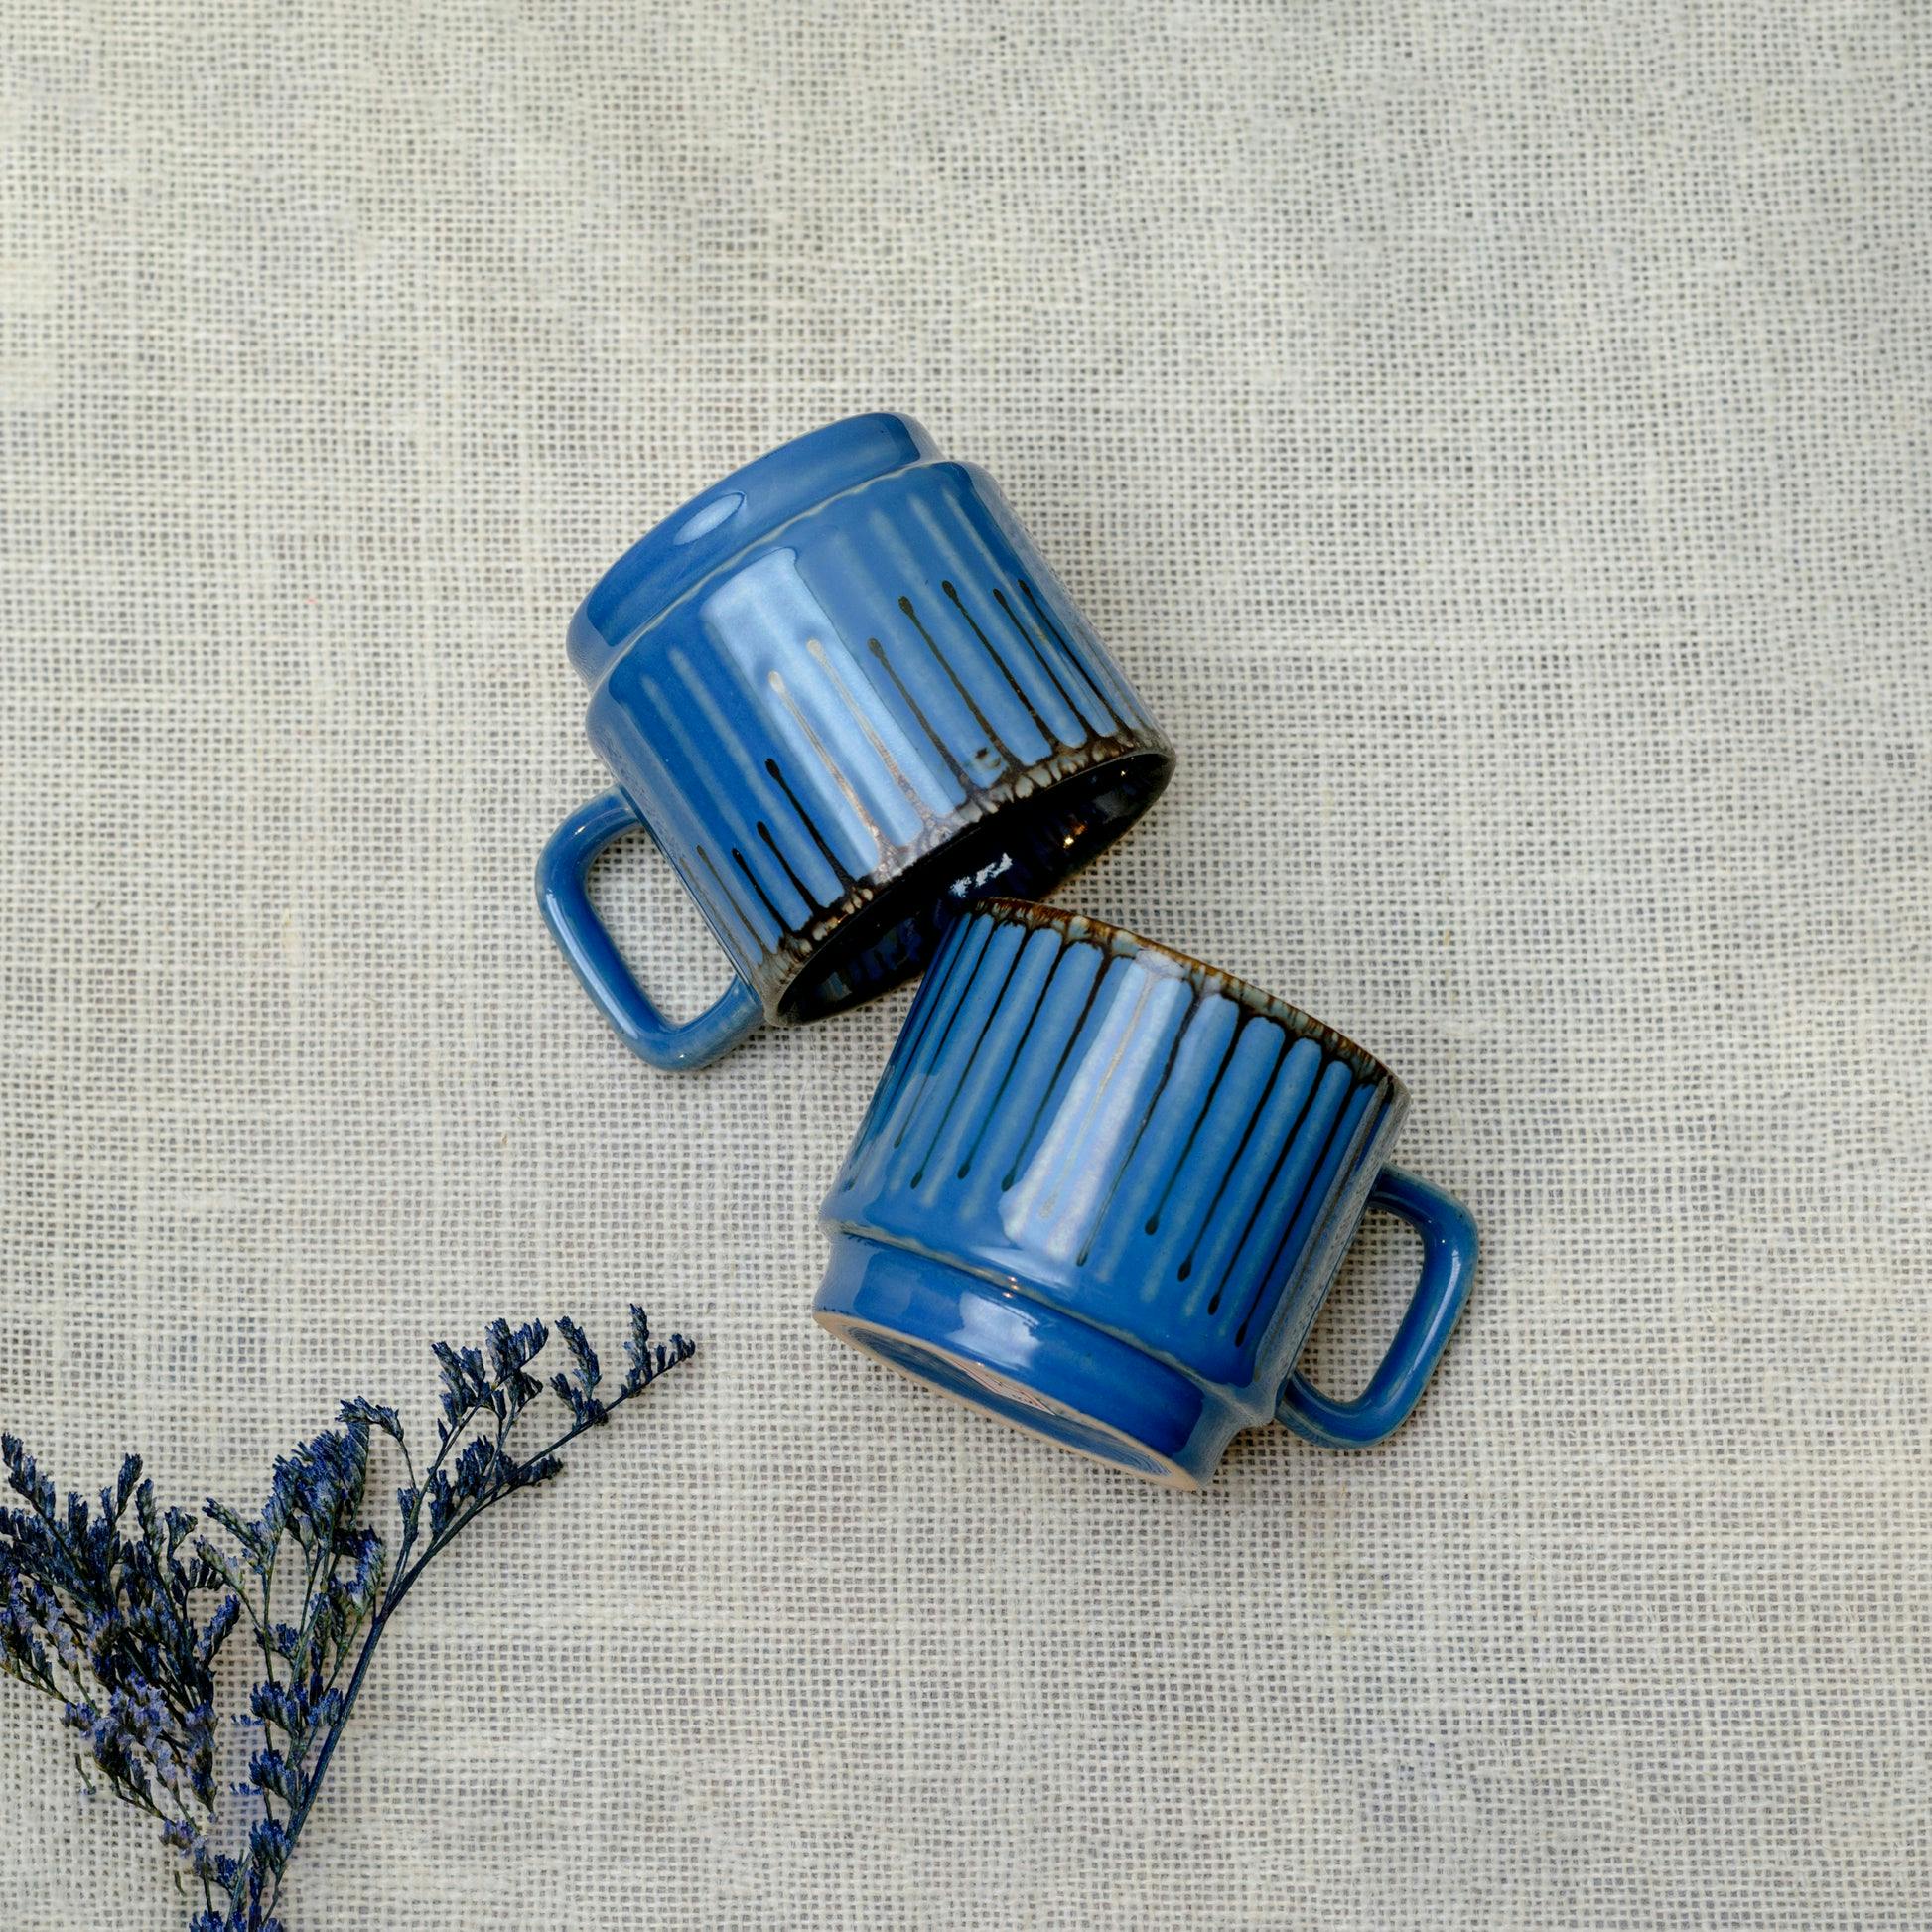 Kai Mugs - Blue set of 2, a product by Oh Yay project